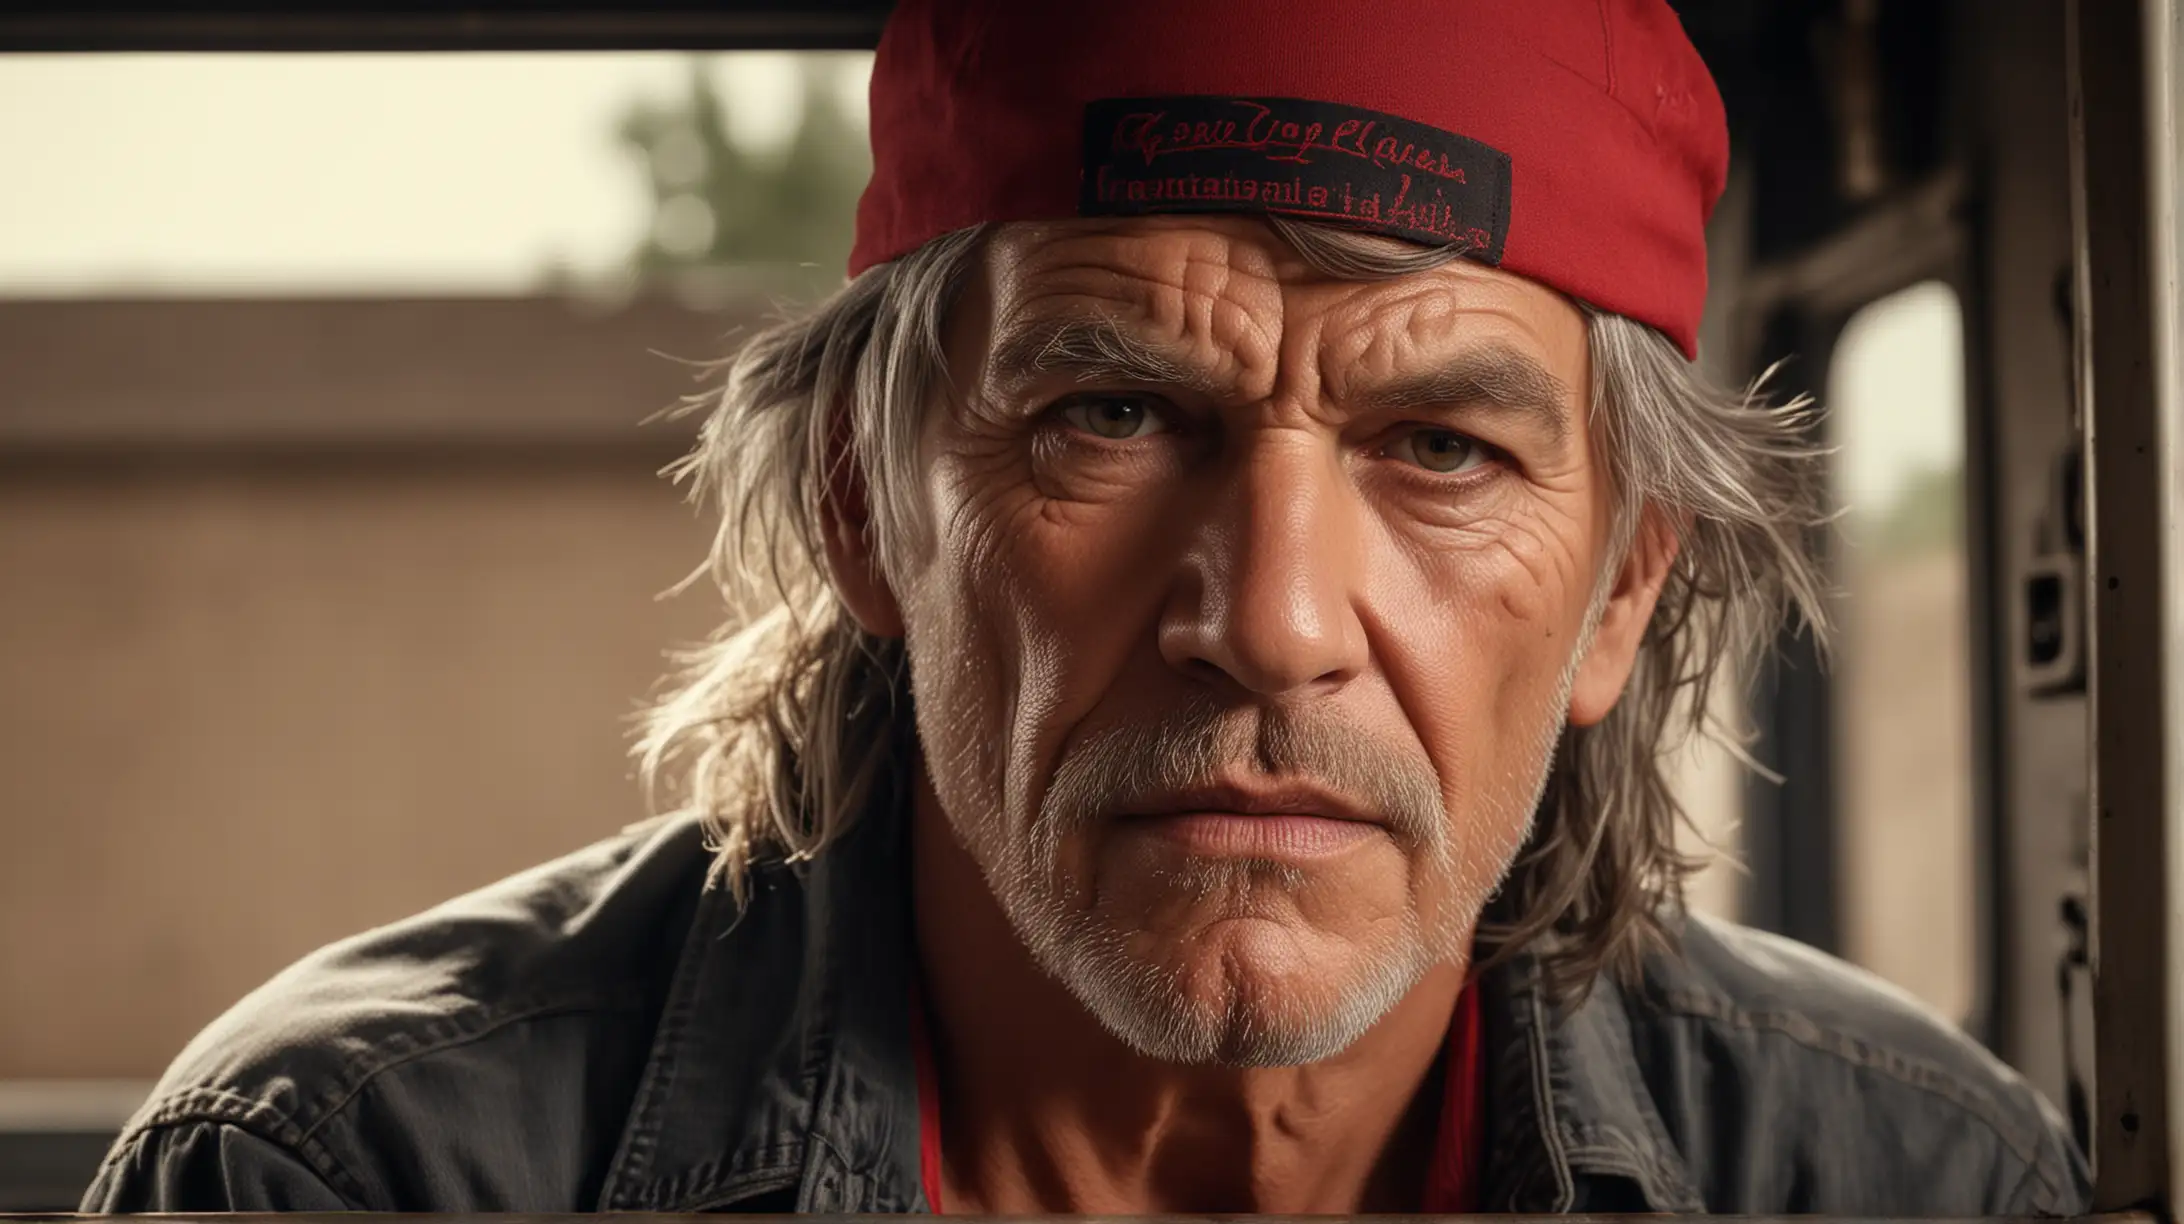 CLASSIC CLOSE UP PORTRAIT PHOTOGRAPHY STYLE, ageing actor Eric Roberts look-alike, longish hair, tattered baseball hat, red bandana around neck, serious, INSIDE TRUCK CAB, photo realistic, cinematic lighting